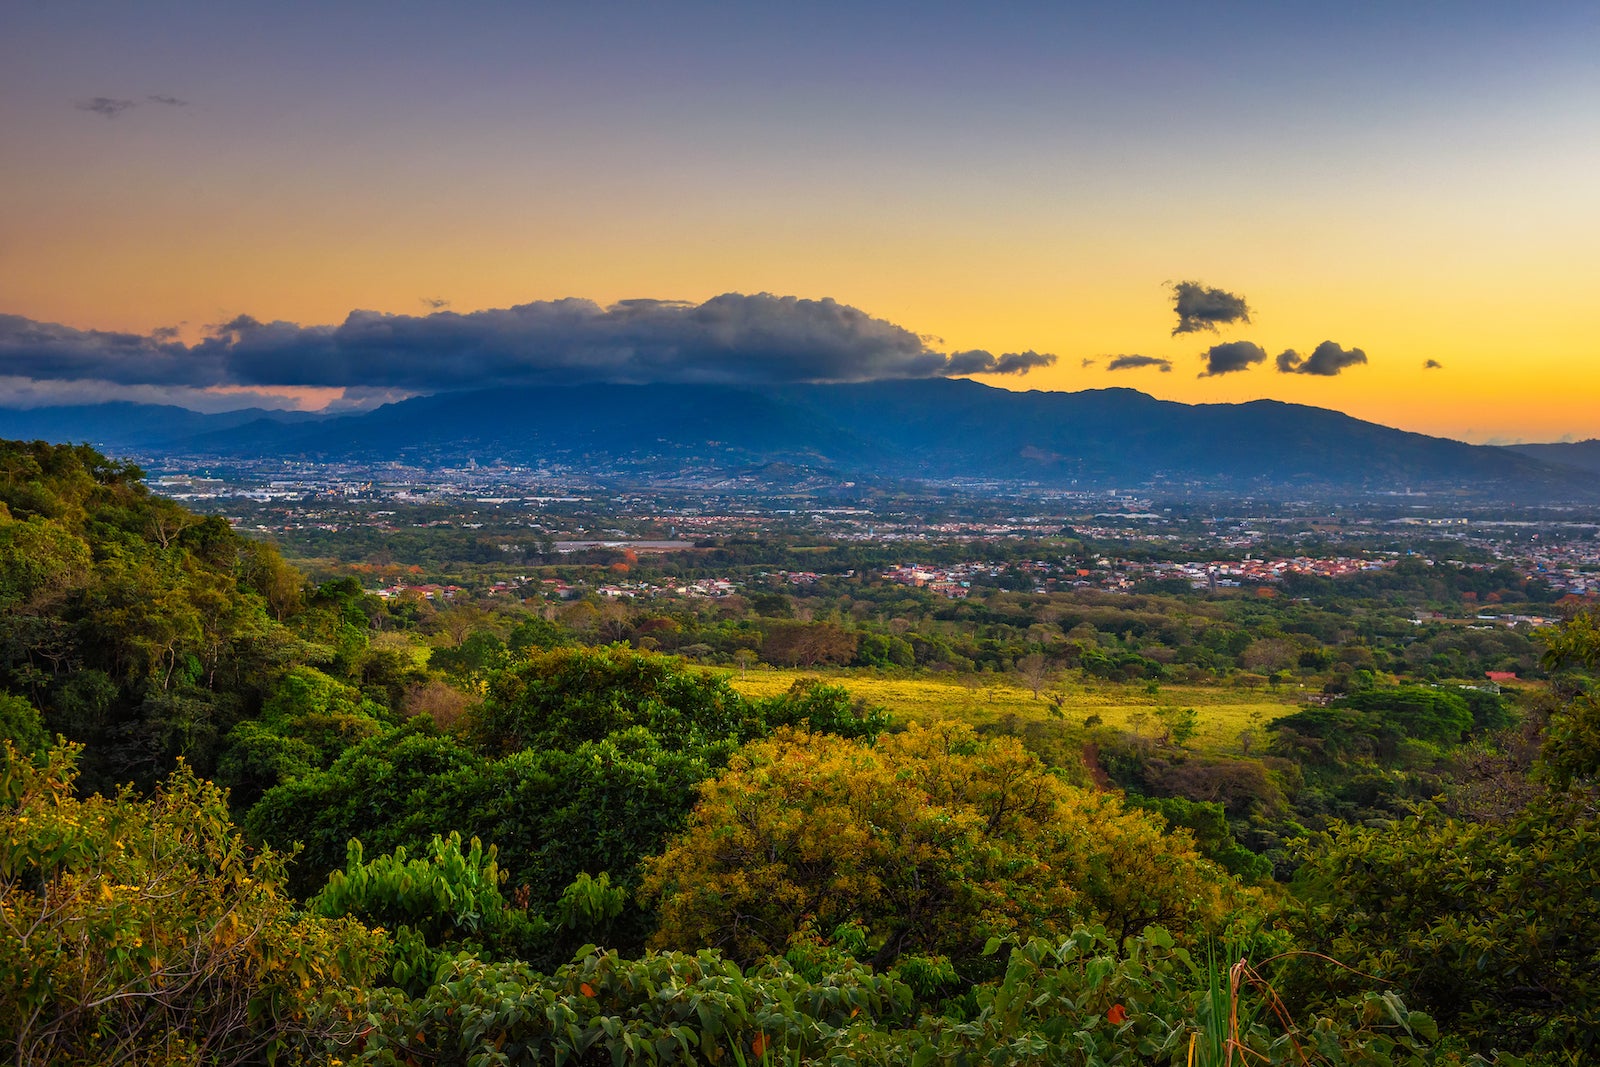 Save money by booking this flights for less than $400 for Costa Rica through November GettyImages 1313883503